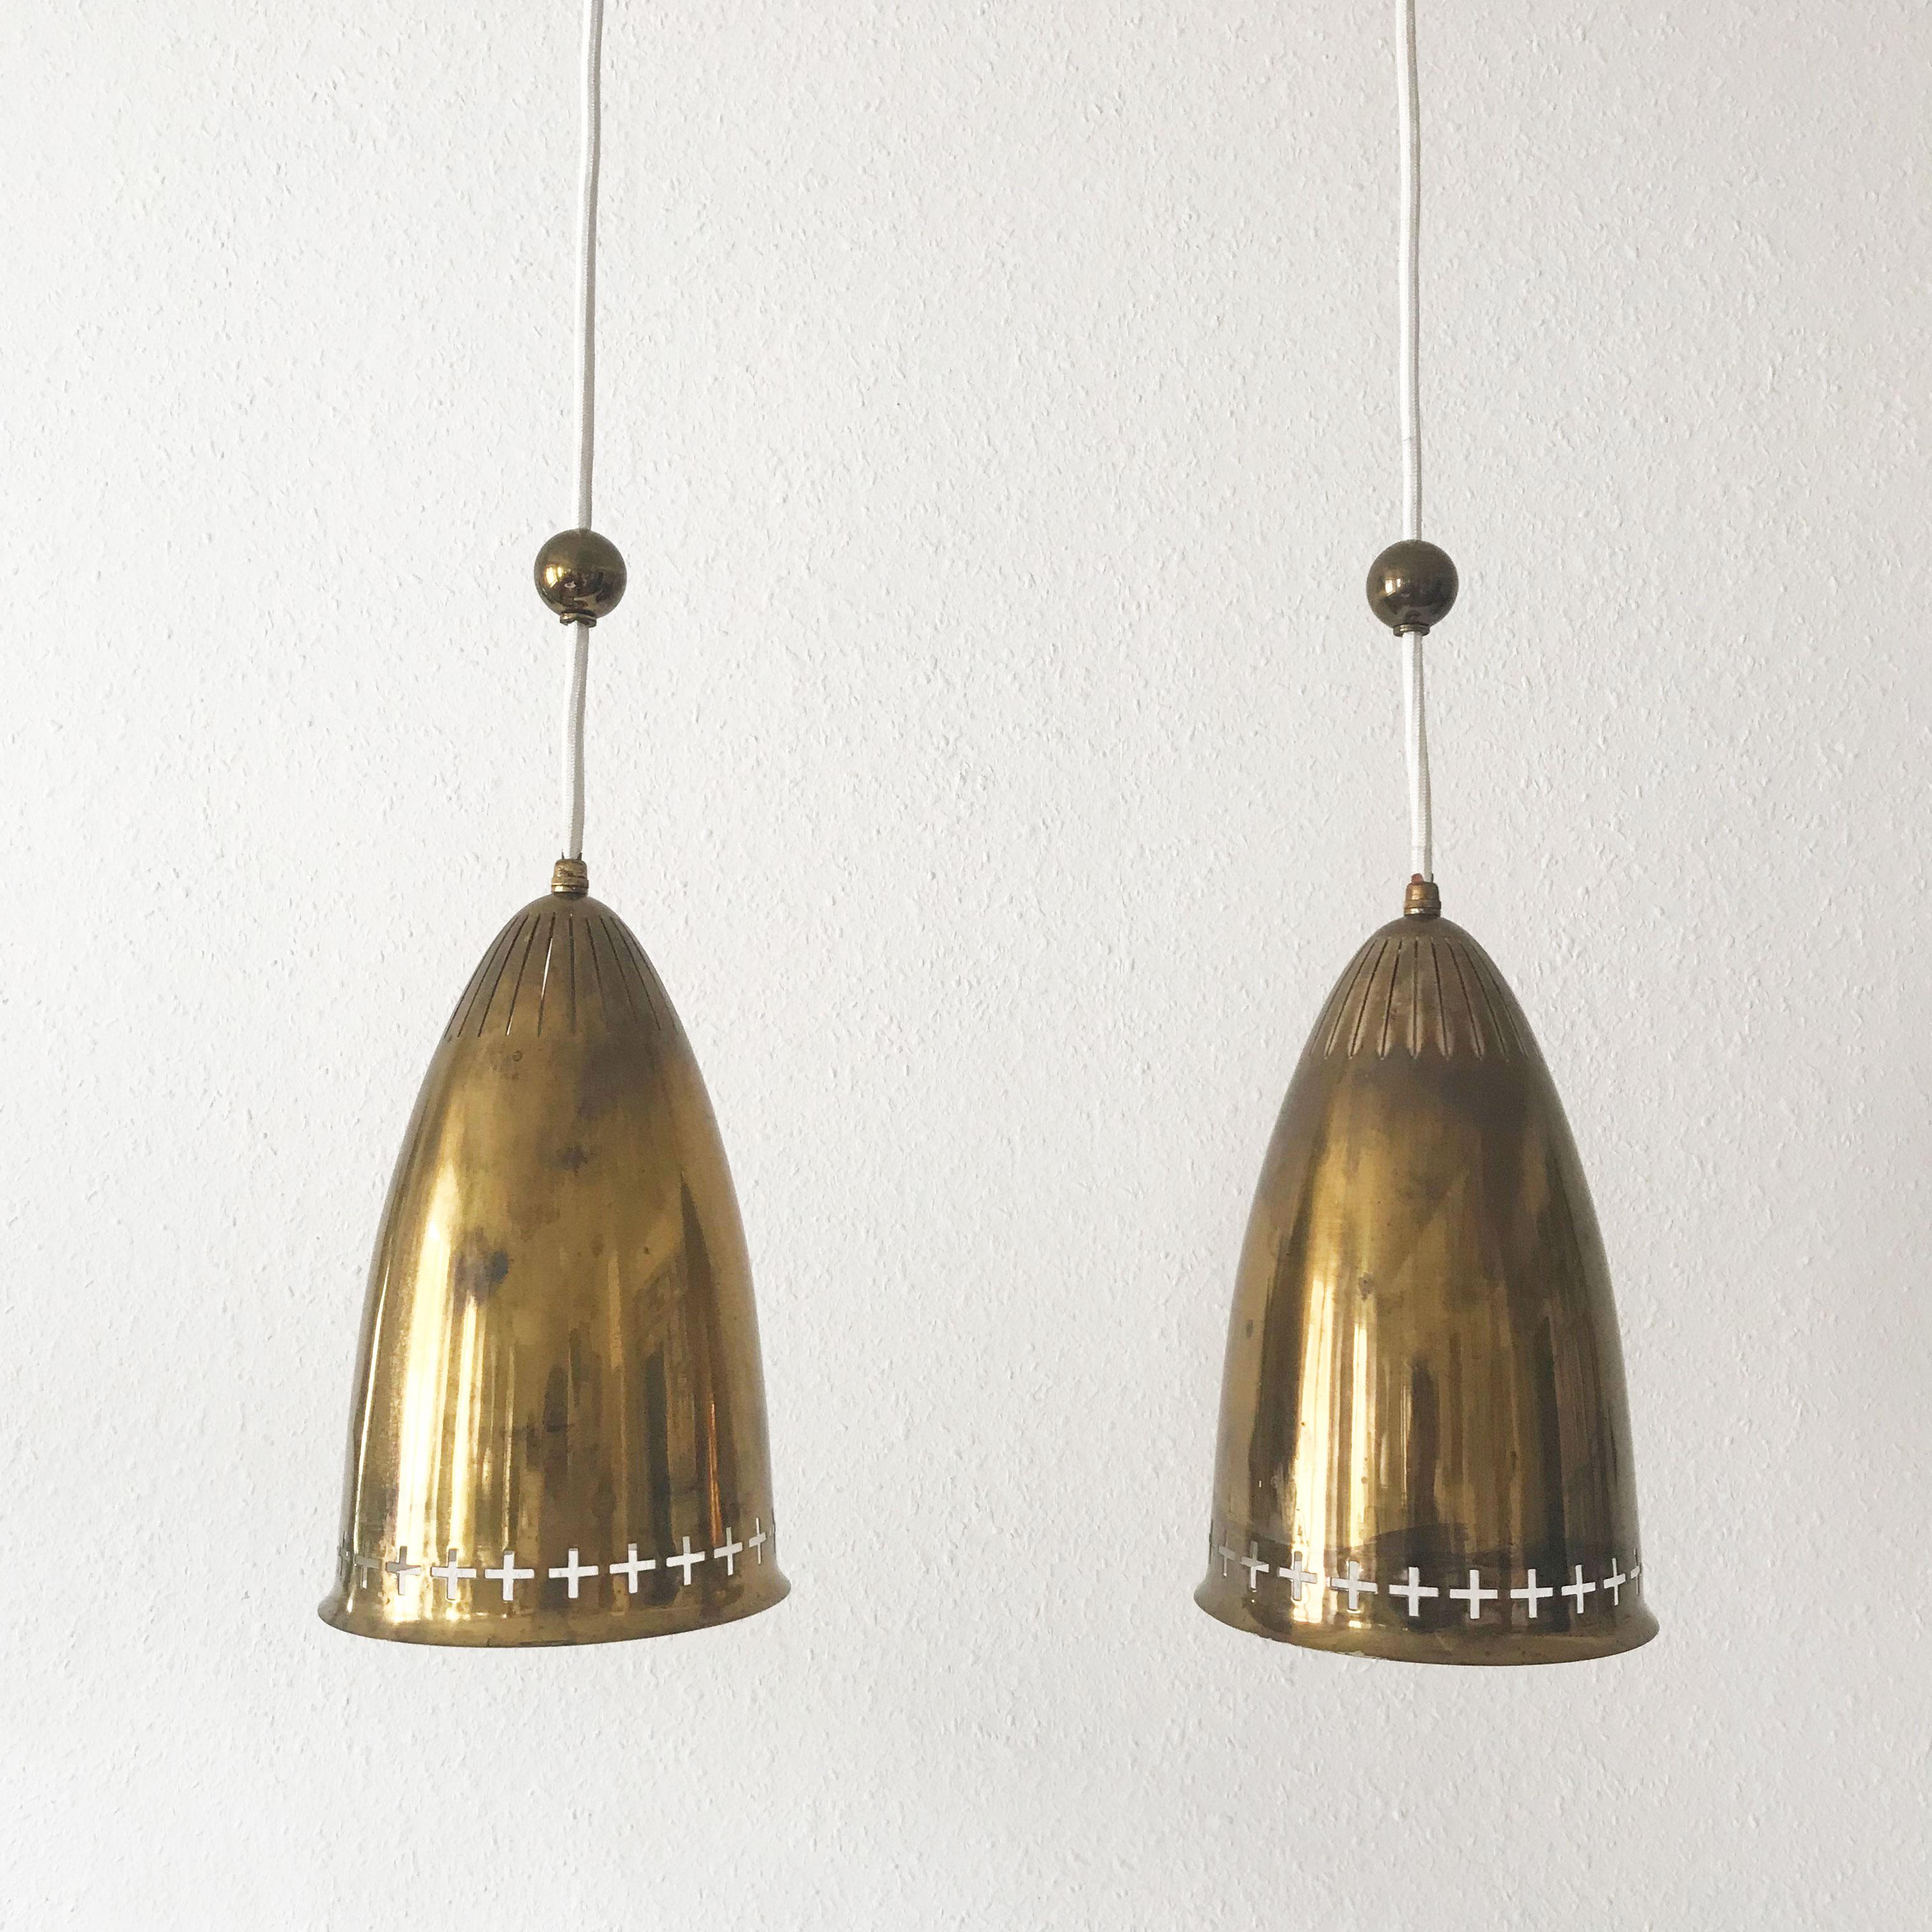 Pair of extremely rare and lovely Mid-Century Modern pendant lamps with perforated lampshades in brass. Designed and manufactured probably in Finland or Sweden in 1950s.

Each lamp is executed with an E27 screw fit bulb holder, re-wired and in